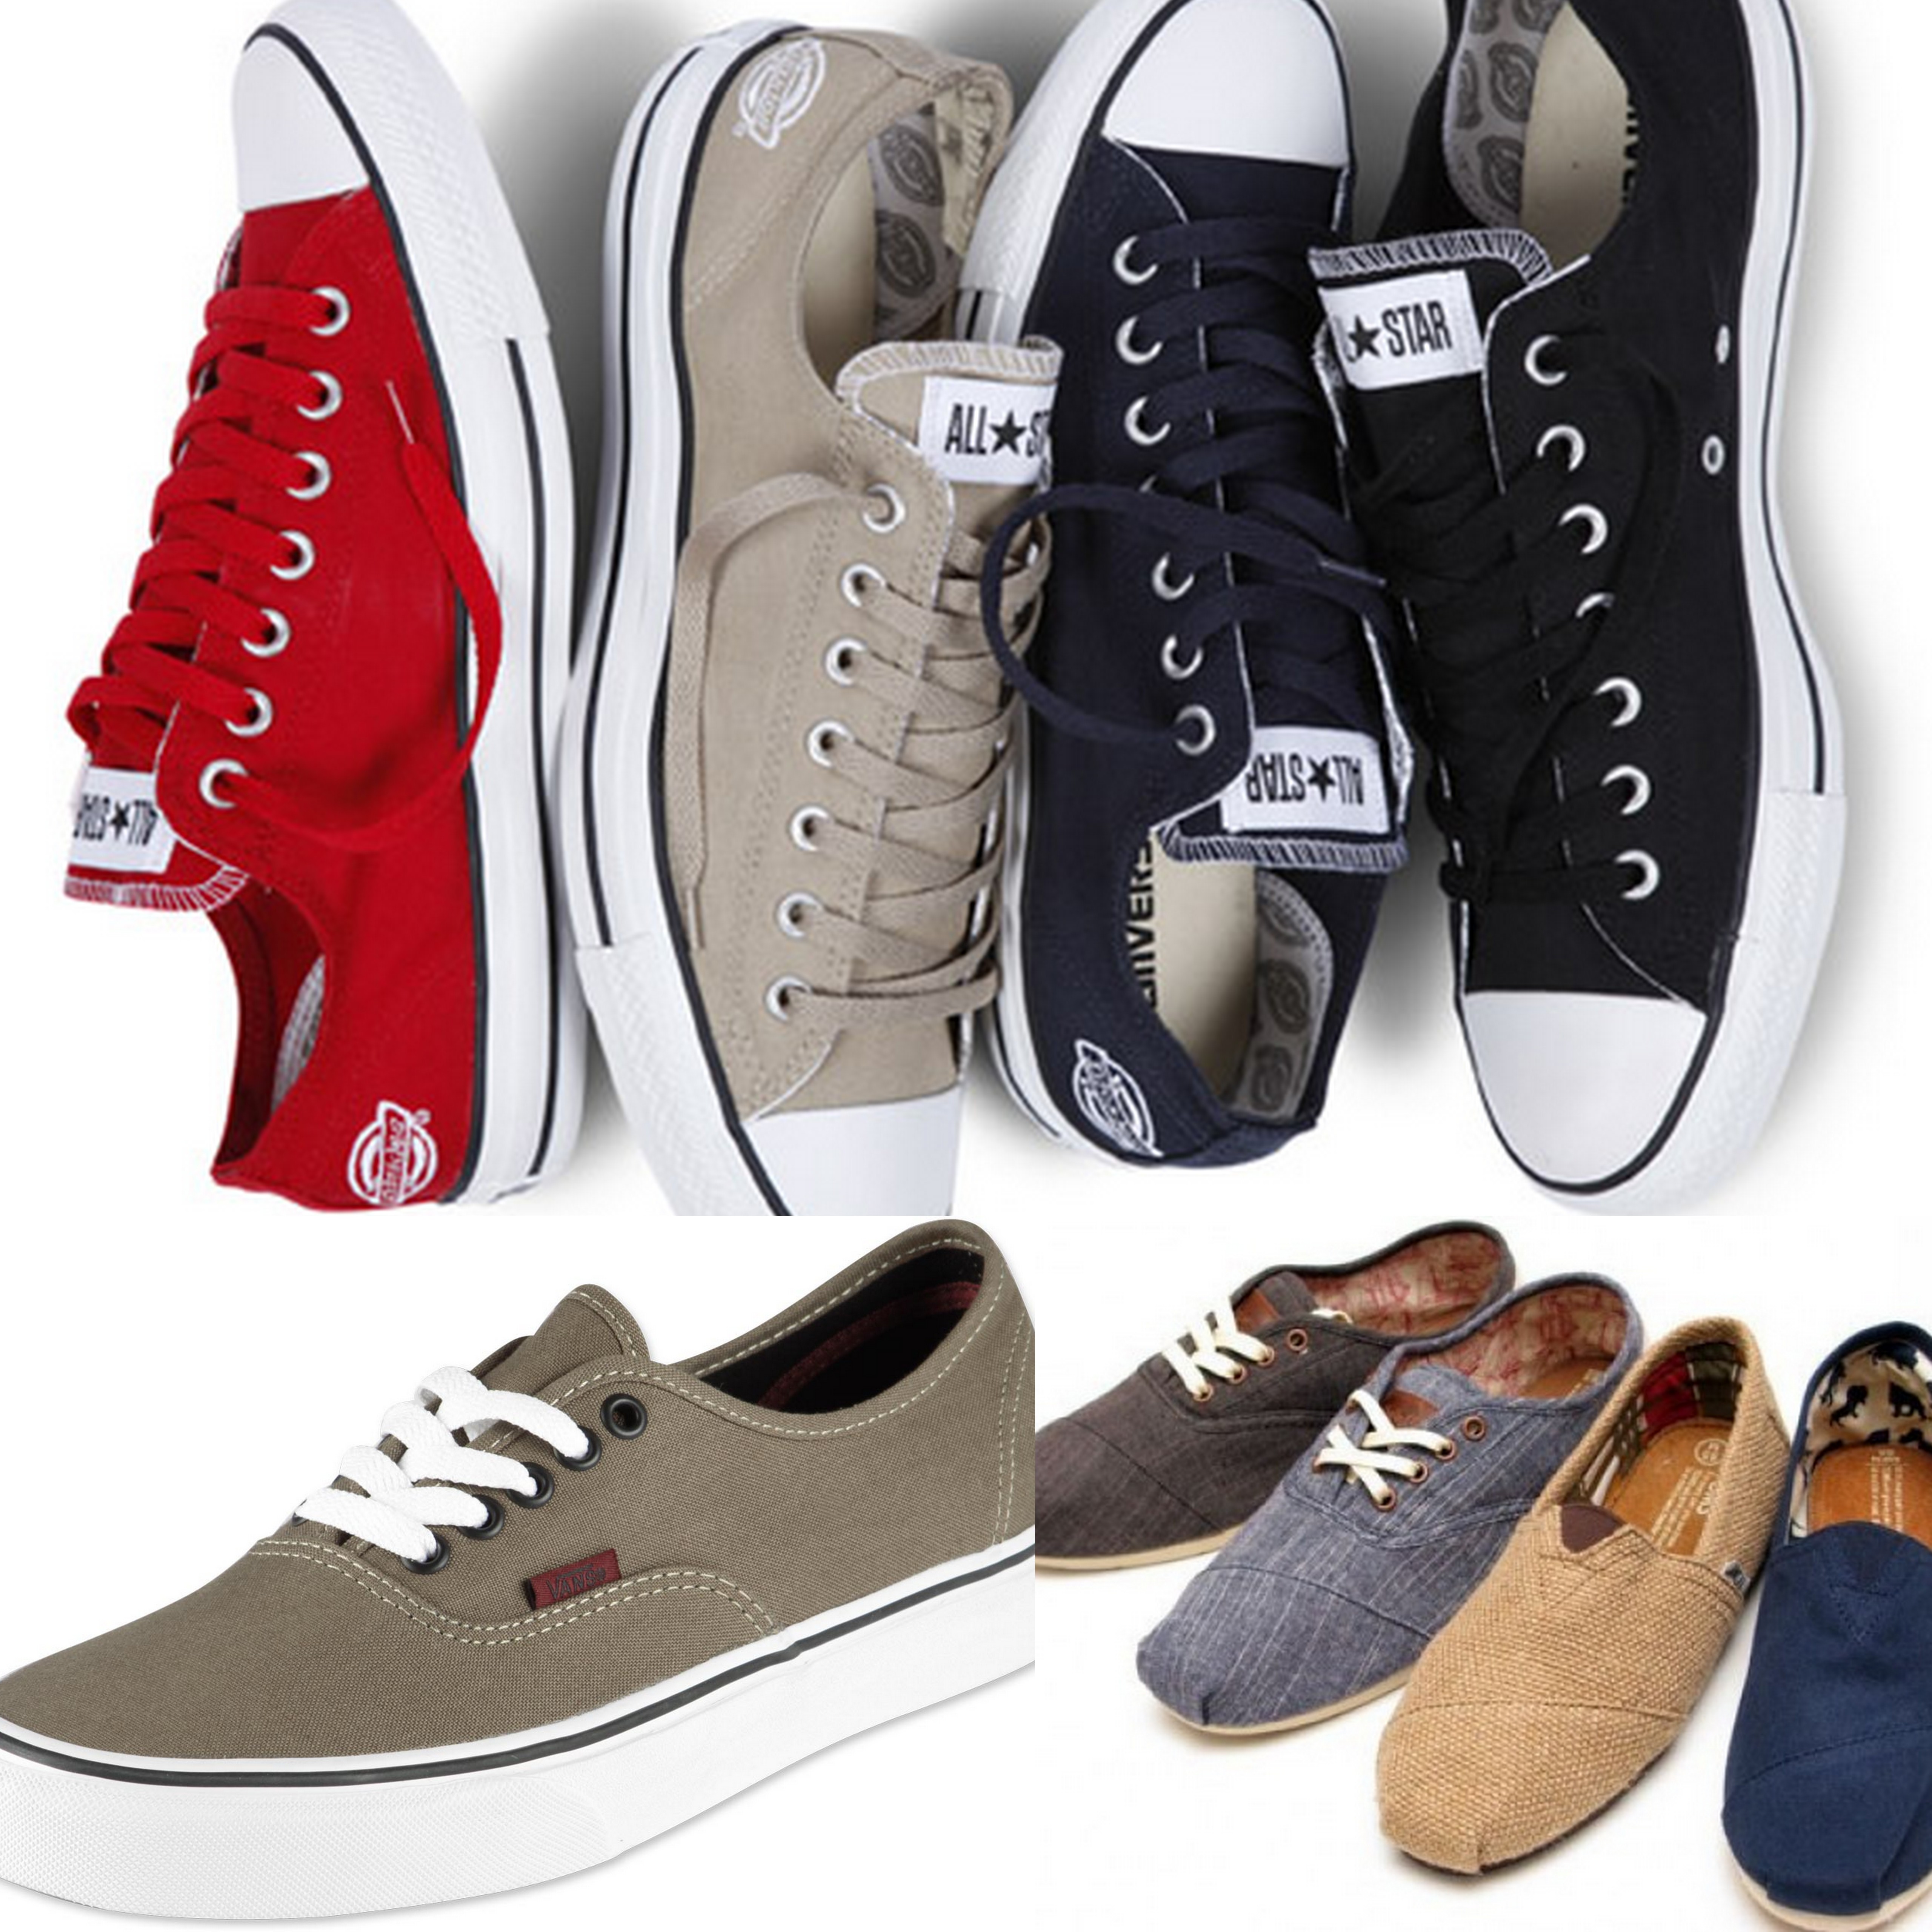 toms or converse